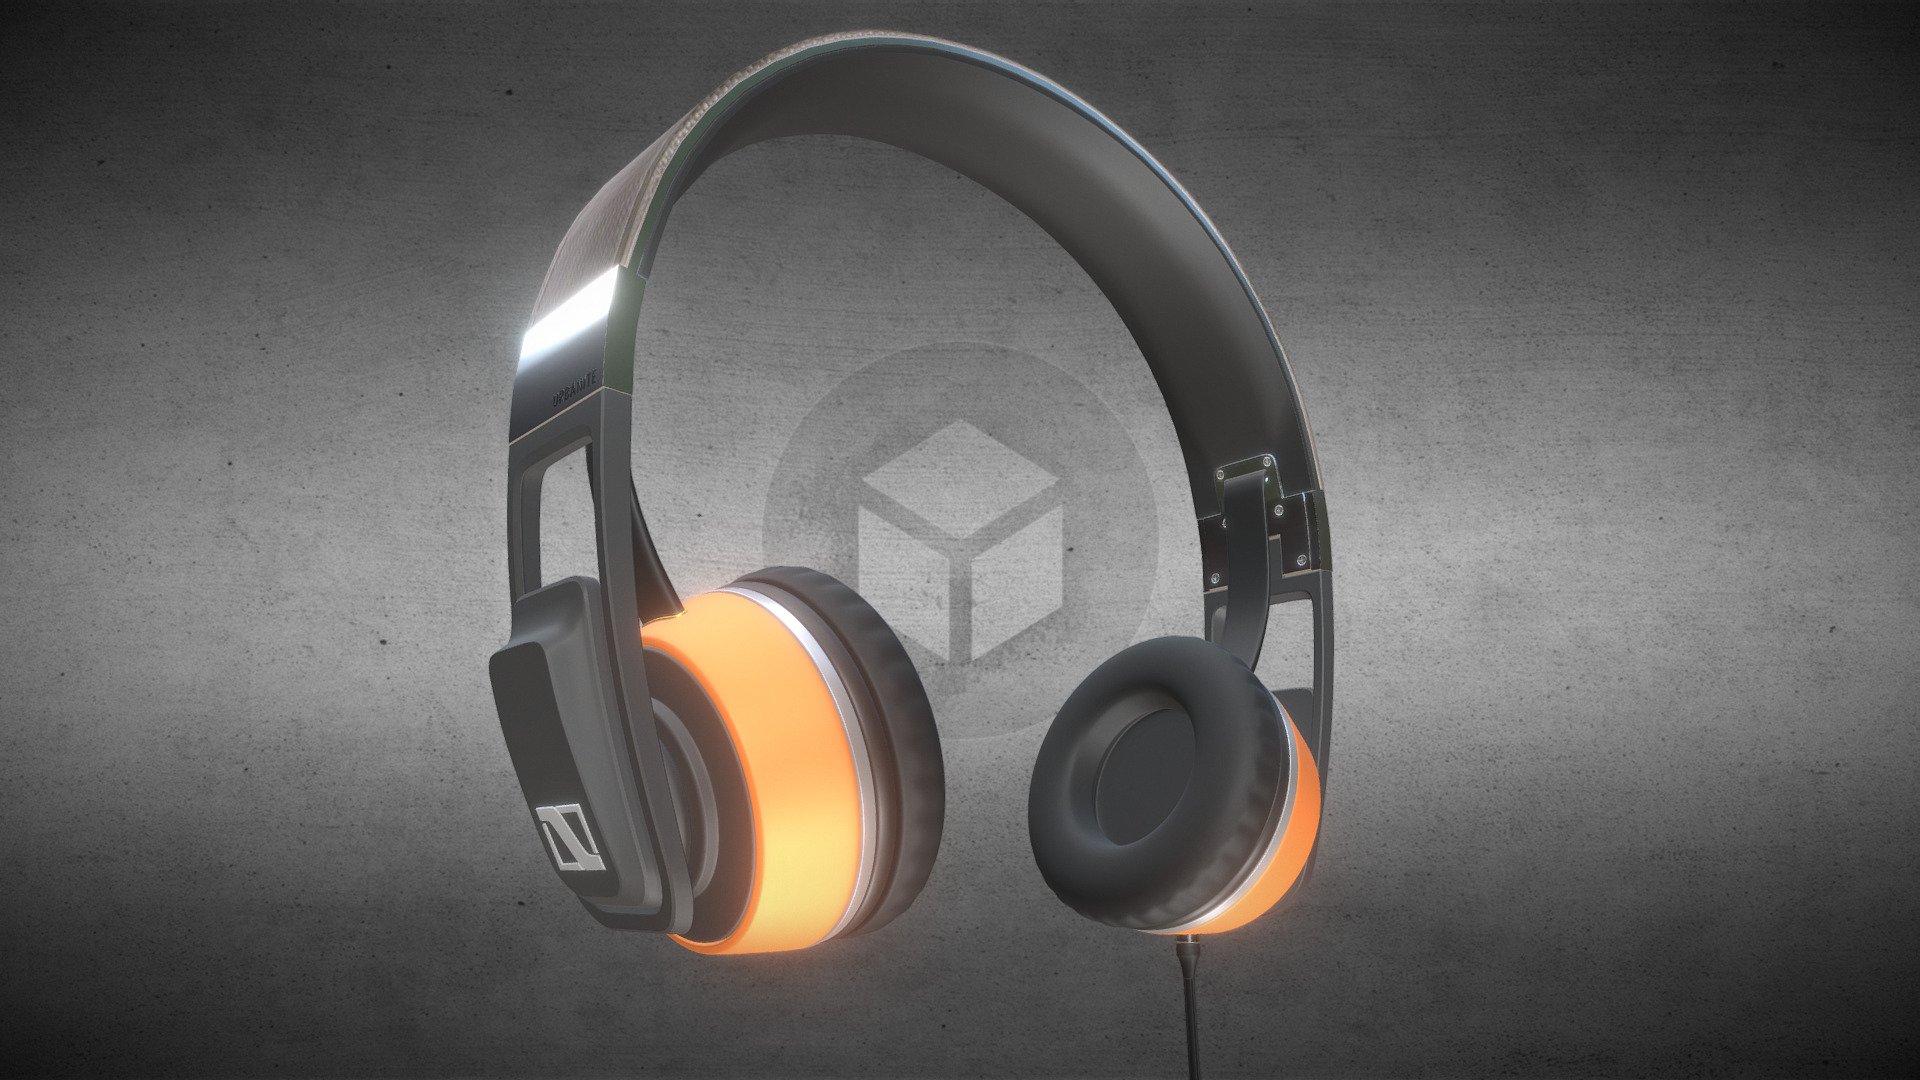 An animated Urbanite Headphone from Sennheiser made with Blender.

Timelapse Video: https://www.youtube.com/watch?v=rWrdTvuREcg

Headphone mid poly with 4k textures: https://sketchfab.com/models/9cb17a119aec4bb78e408c0eac670886



Made with Blender 2.77a - Headphone High Poly - Buy Royalty Free 3D model by 3DHaupt (@dennish2010) 3d model